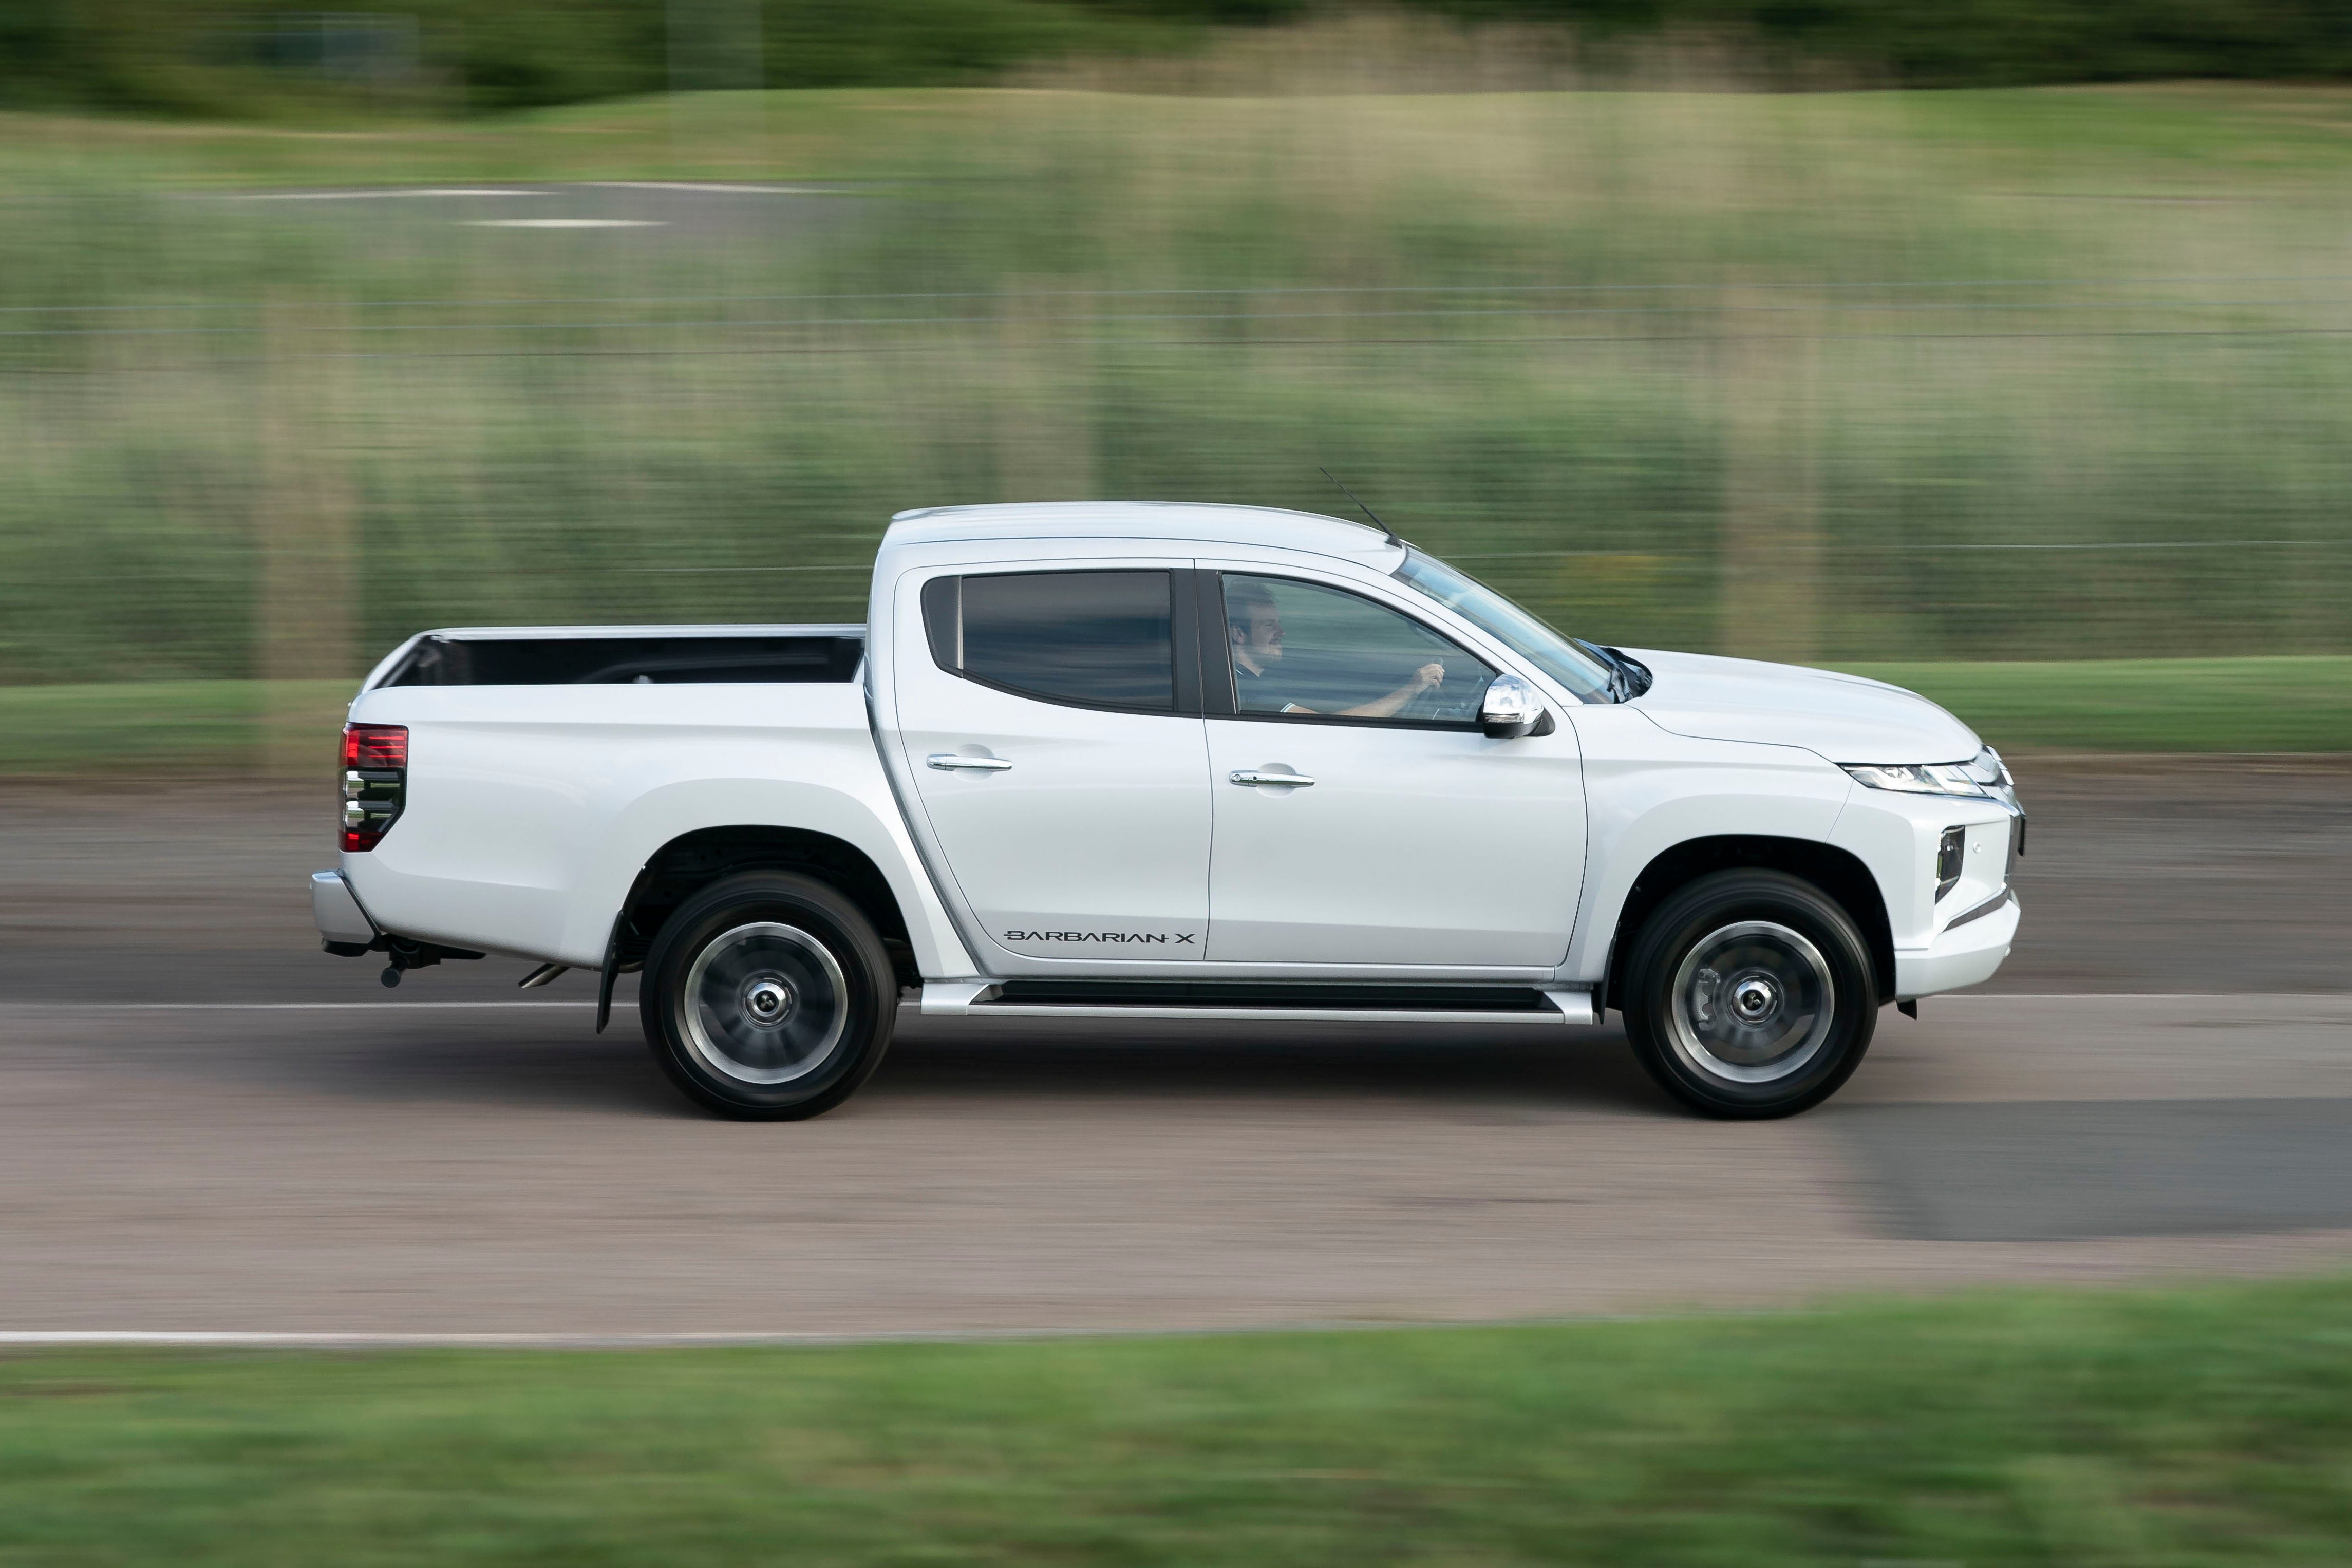 Top 5 Things We Love About The Mitsubishi L200 Barbarian X